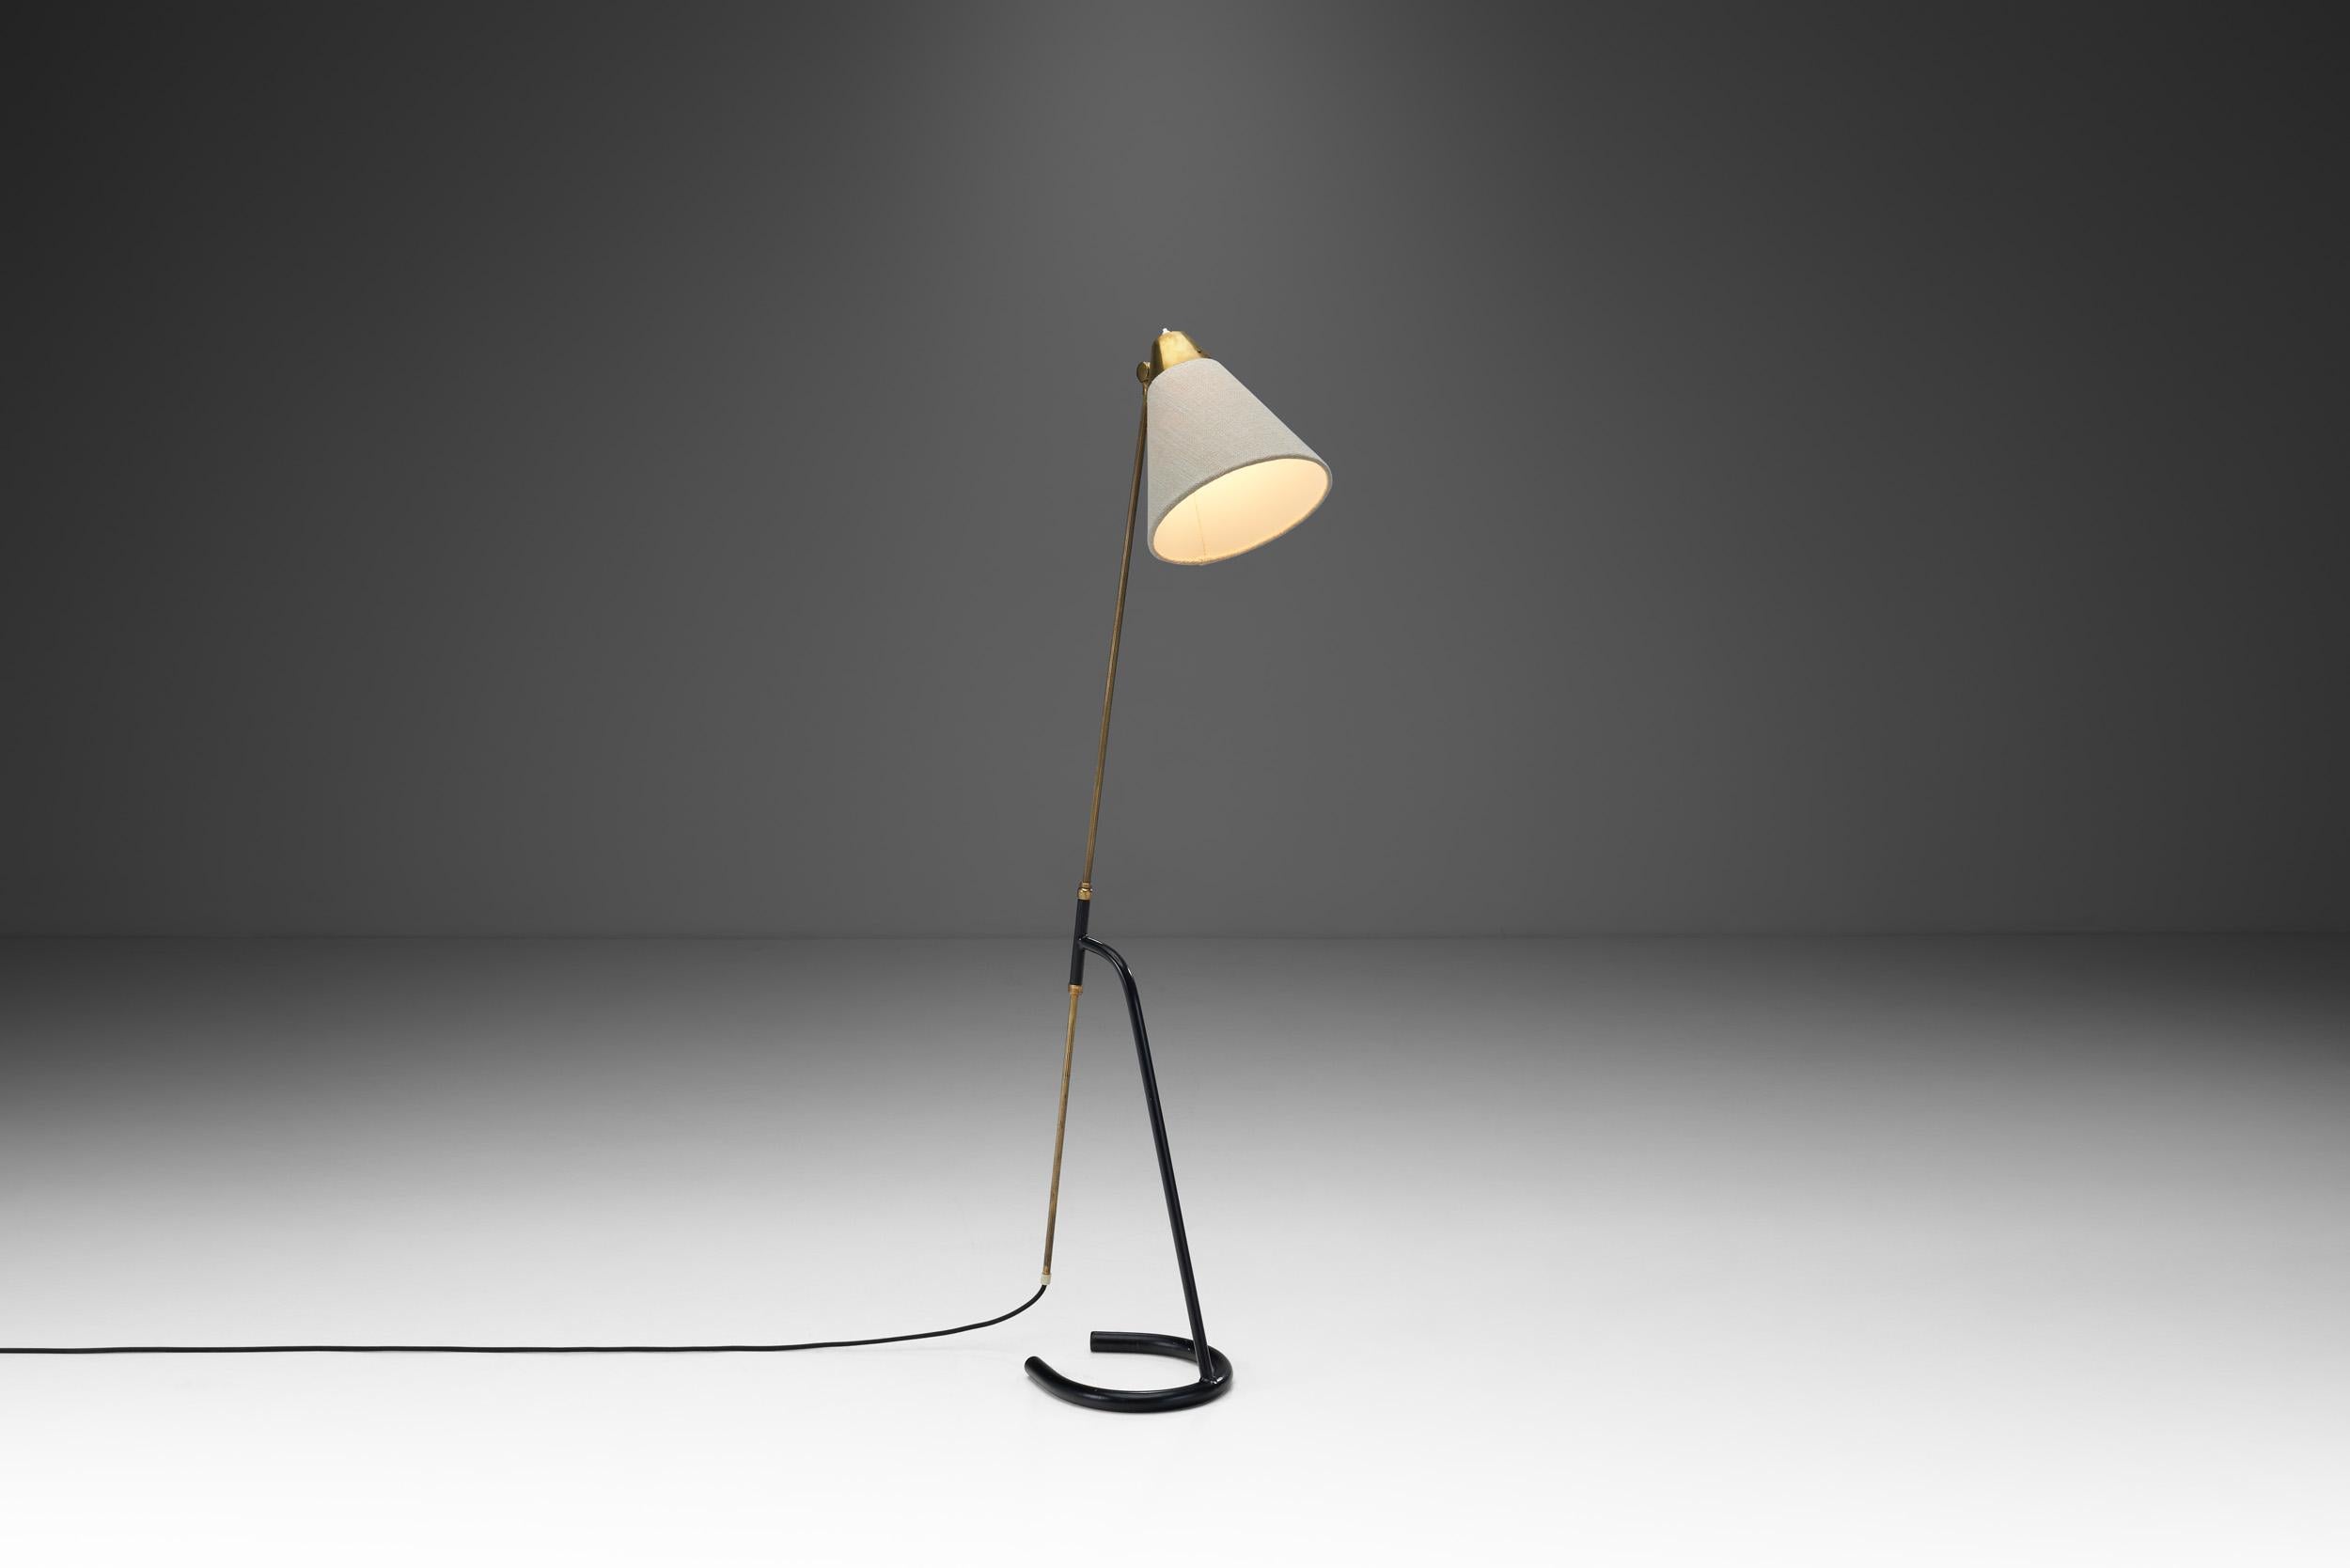 Swedish architect-designer, Hans Bergström was the owner and creative director of the lighting firm Ateljé Lyktan, which he founded in Åhus in 1934. Bergström created amazing lighting in various models - including this model -, many of which were